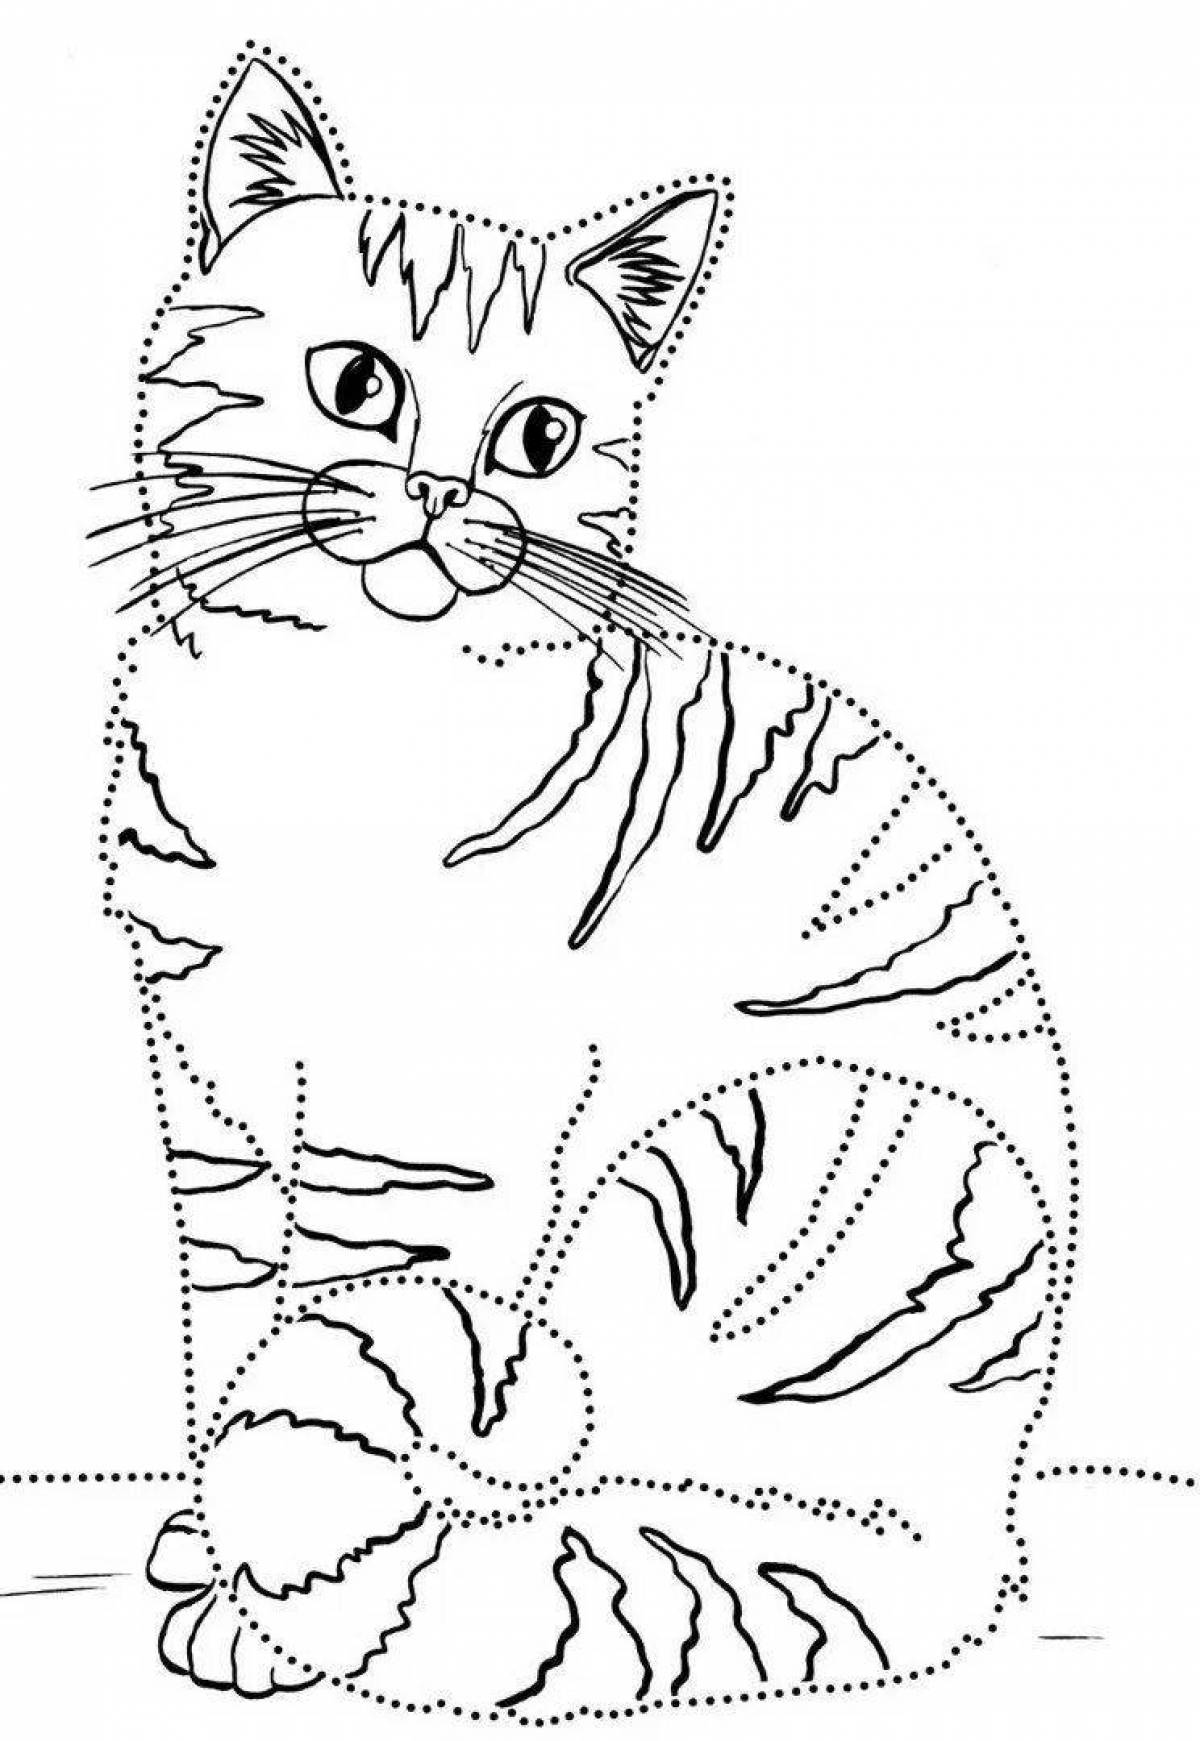 Charming coloring book for children 6-7 years old with cats